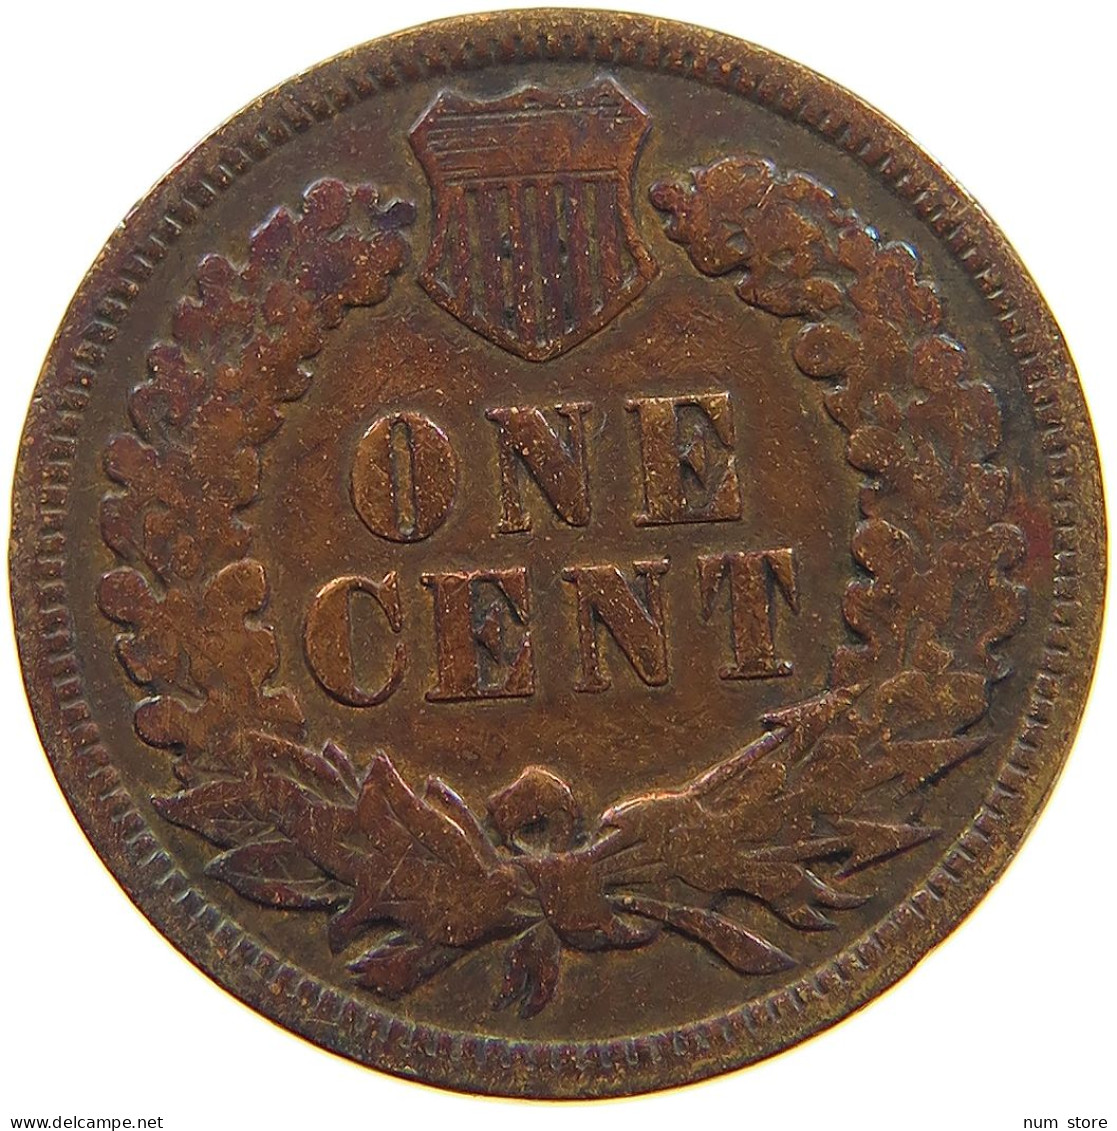 UNITED STATES OF AMERICA CENT 1899 INDIAN HEAD #a063 0259 - 1859-1909: Indian Head